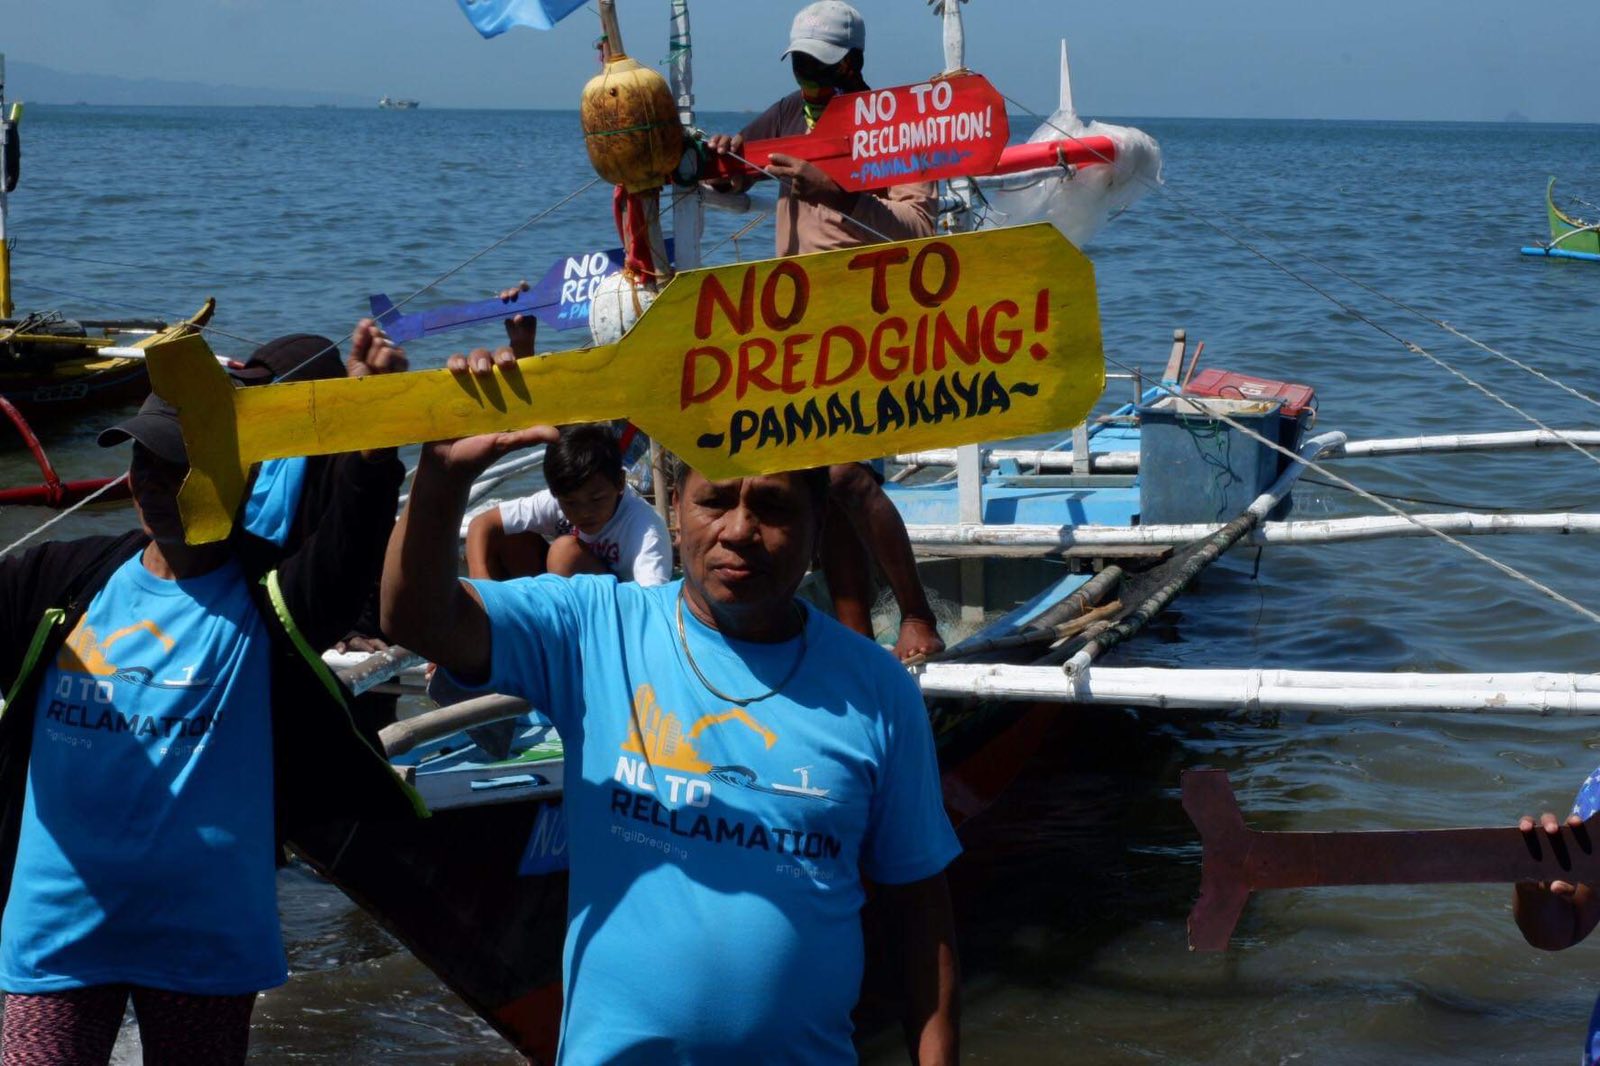 At least 11 fisherfolk stage a fluvial protest against dredging activities in Manila Bay on Tuesday, March 14, 2023